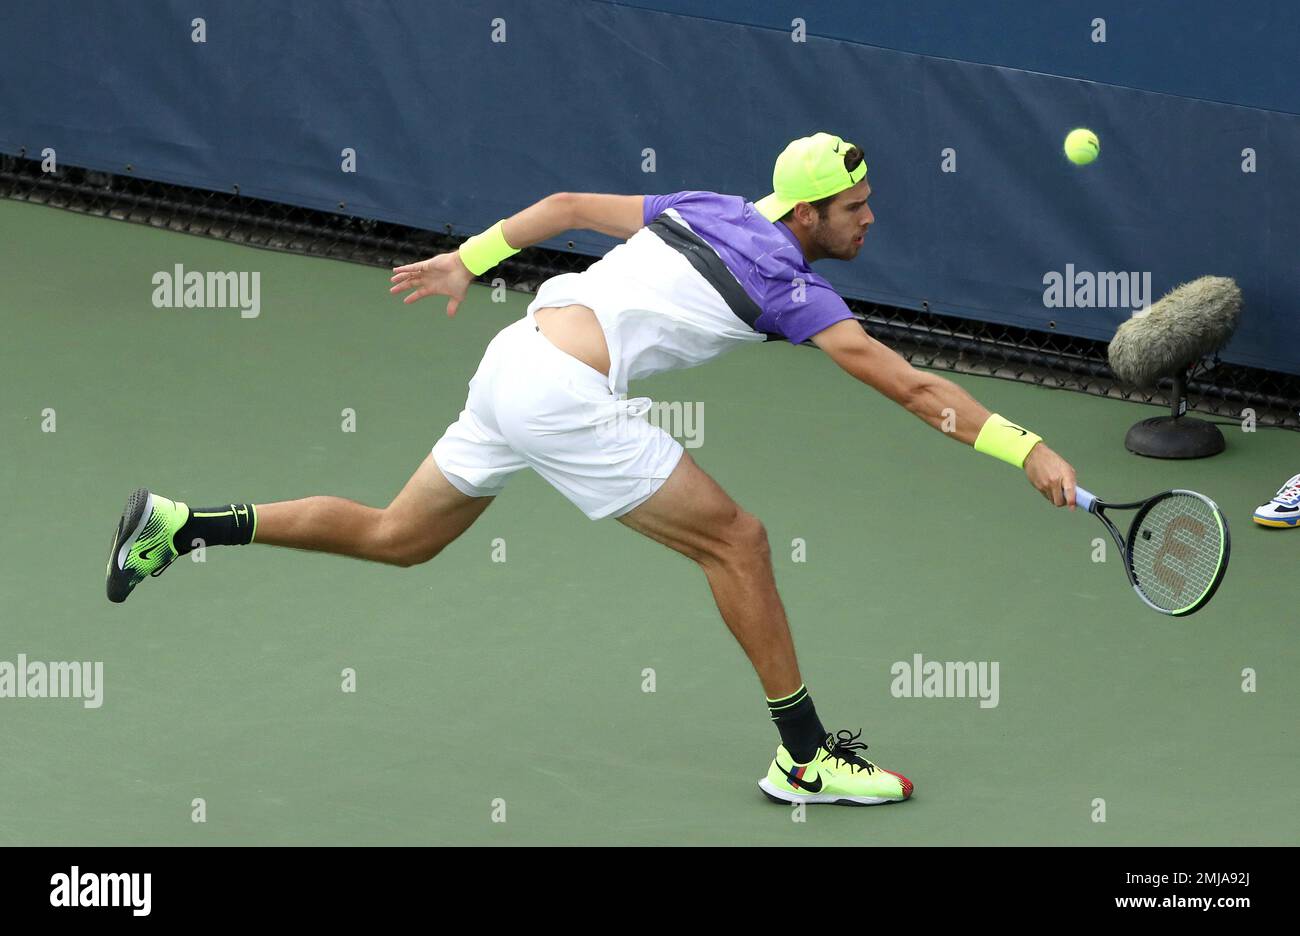 Karen Khachanov, of Russia, returns a shot to Vasek Pospisil, of Canada,  during the first round of the US Open tennis tournament Tuesday, Aug. 27,  2019, in New York. (AP Photo/Kevin Hagen